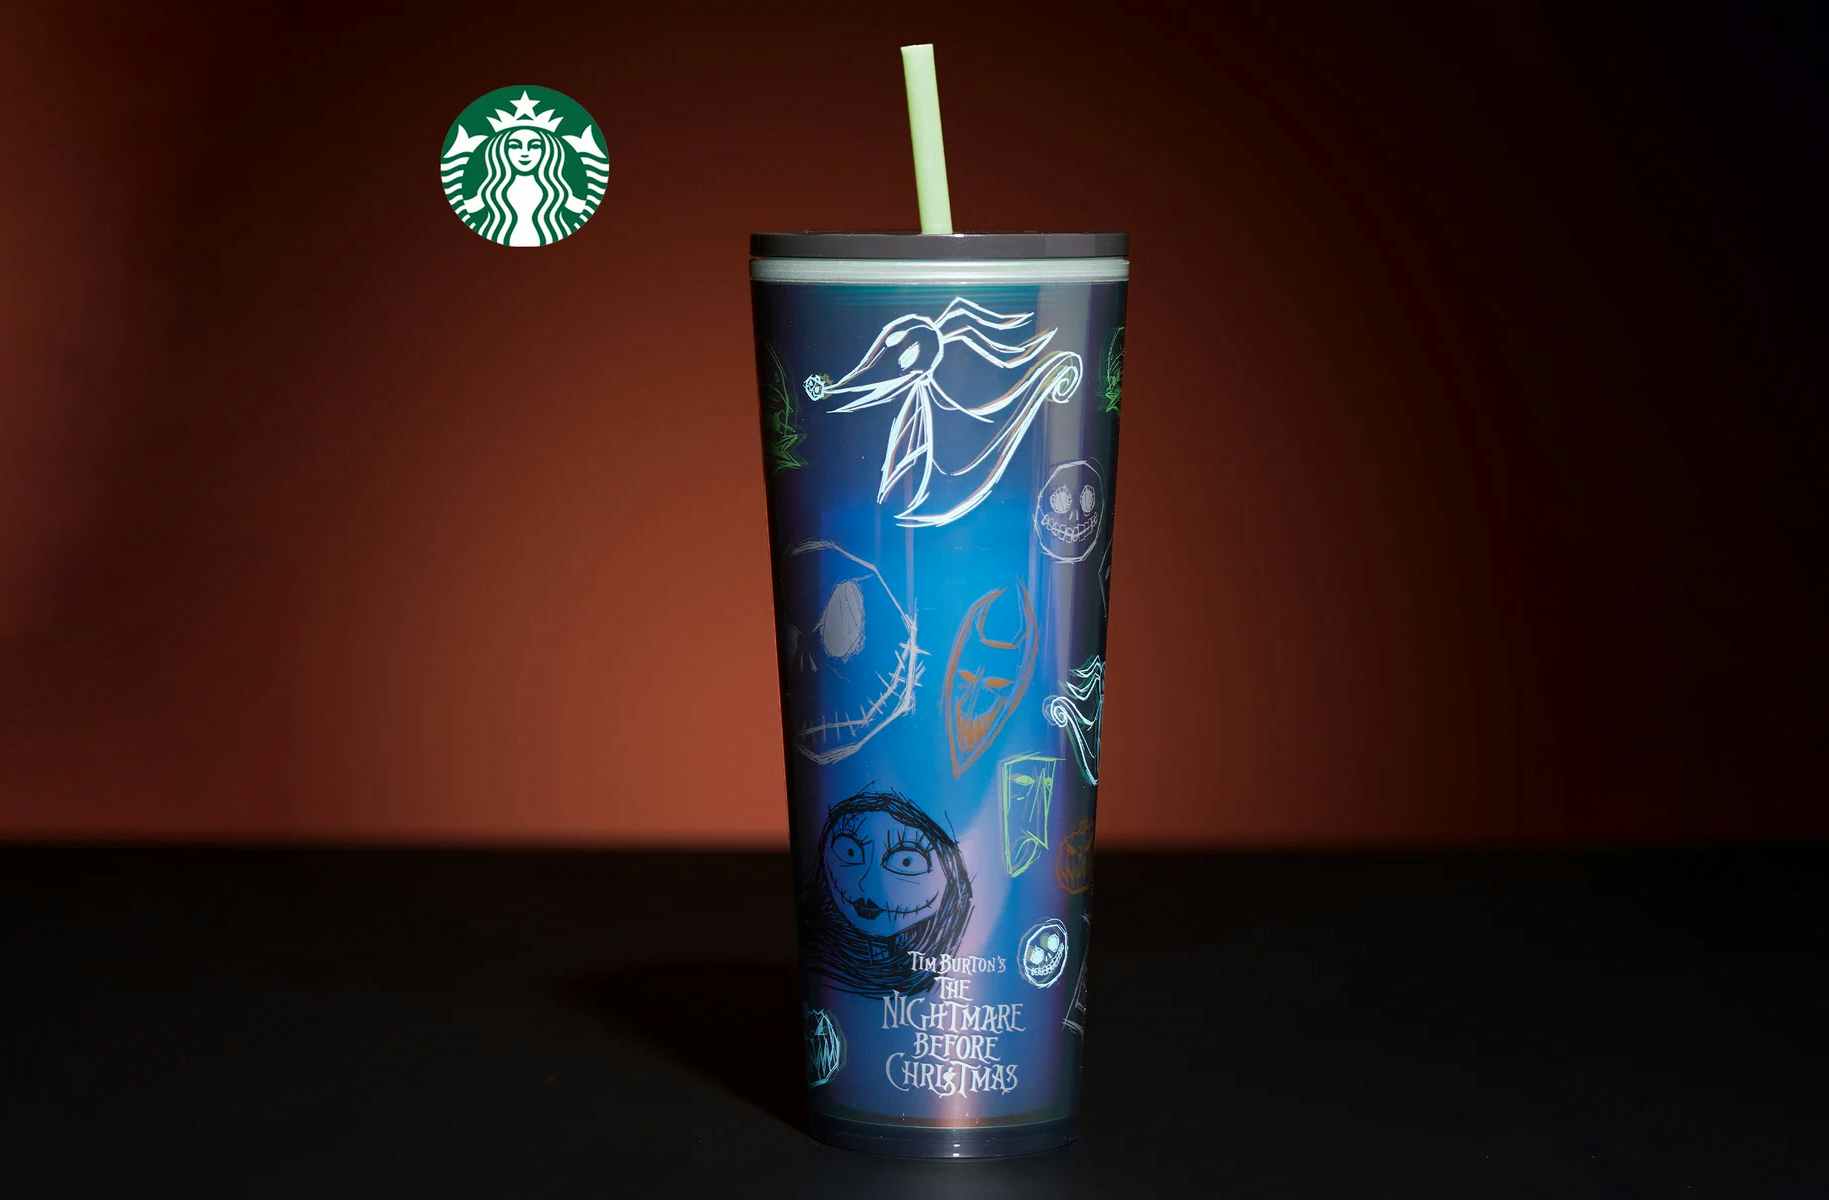 https://prod-cdn-thekrazycouponlady.imgix.net/wp-content/uploads/2023/09/tim-burtons-nightmare-before-christmas-starbucks-cold-cup-new-release-copy-1695654619-1695654619.jpg?auto=format&fit=fill&q=25